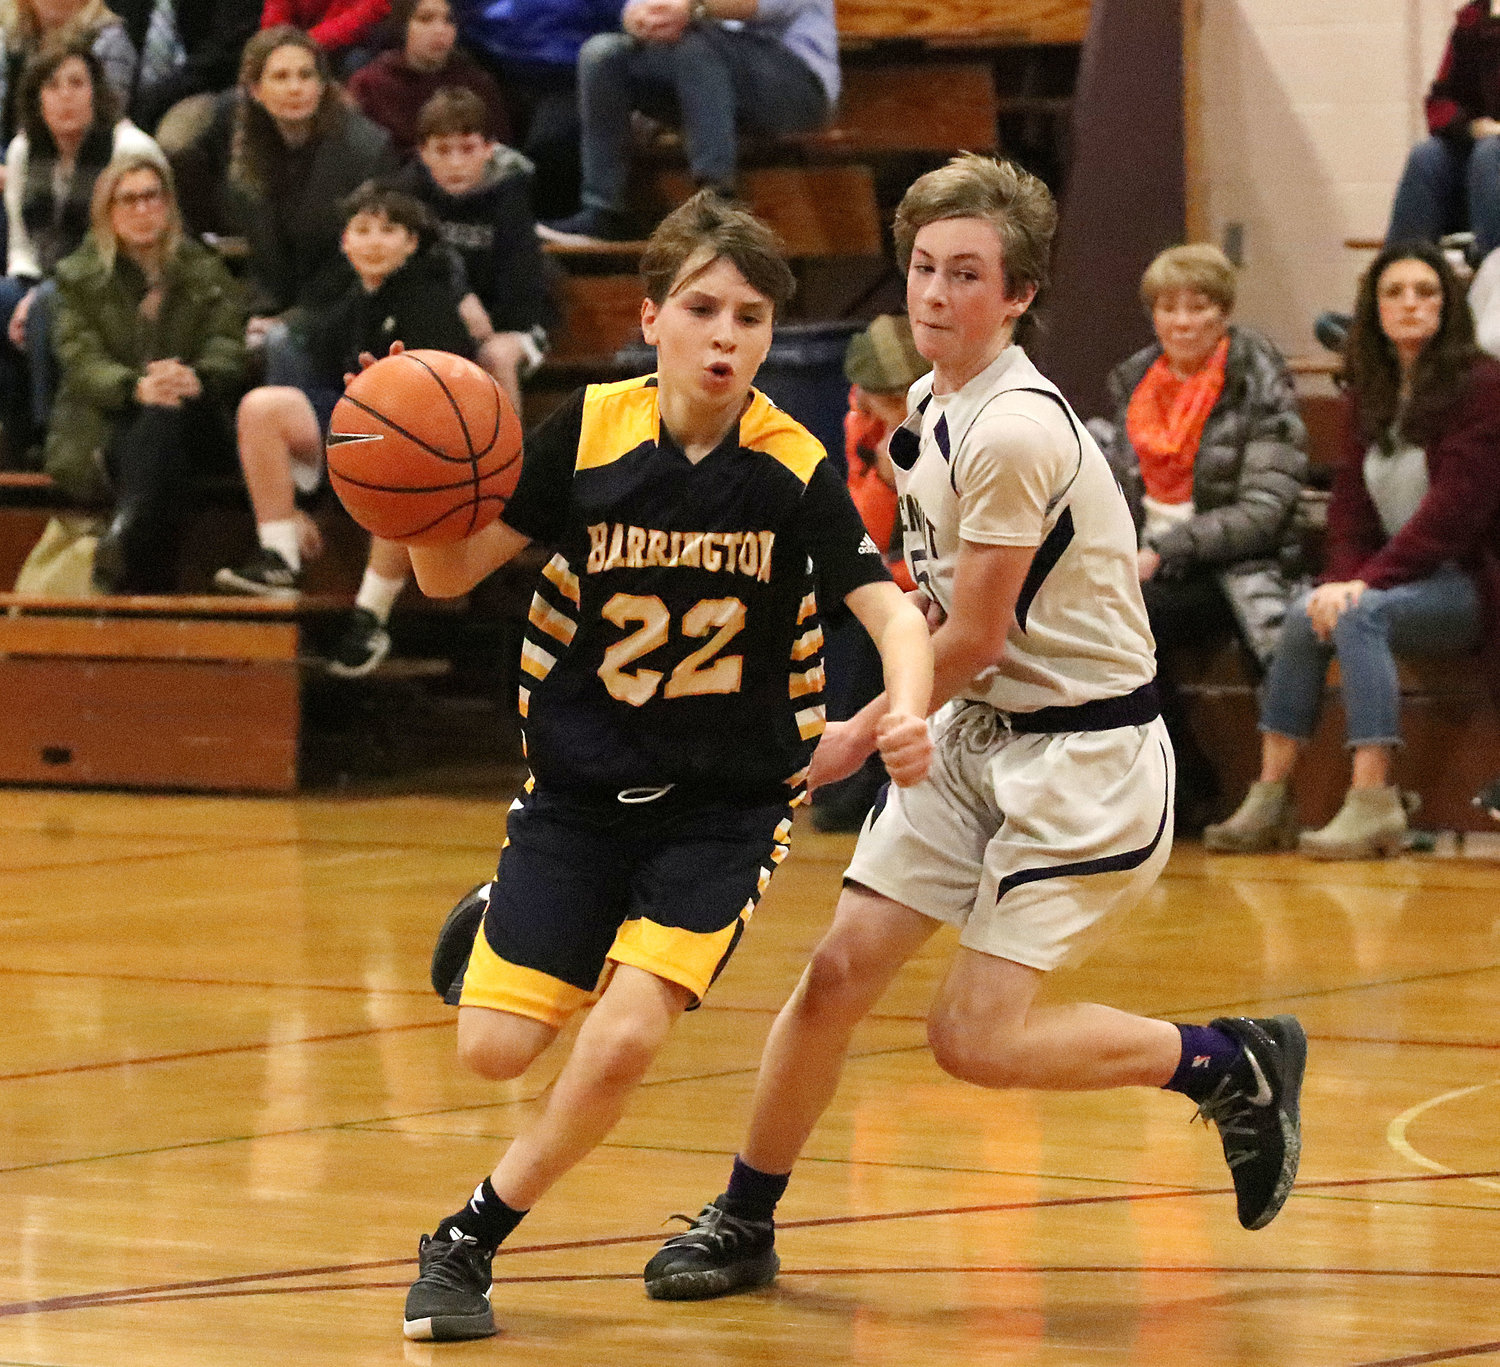 Gabe Tanous has excels at basketball also, starting for the middle school team two straight years.